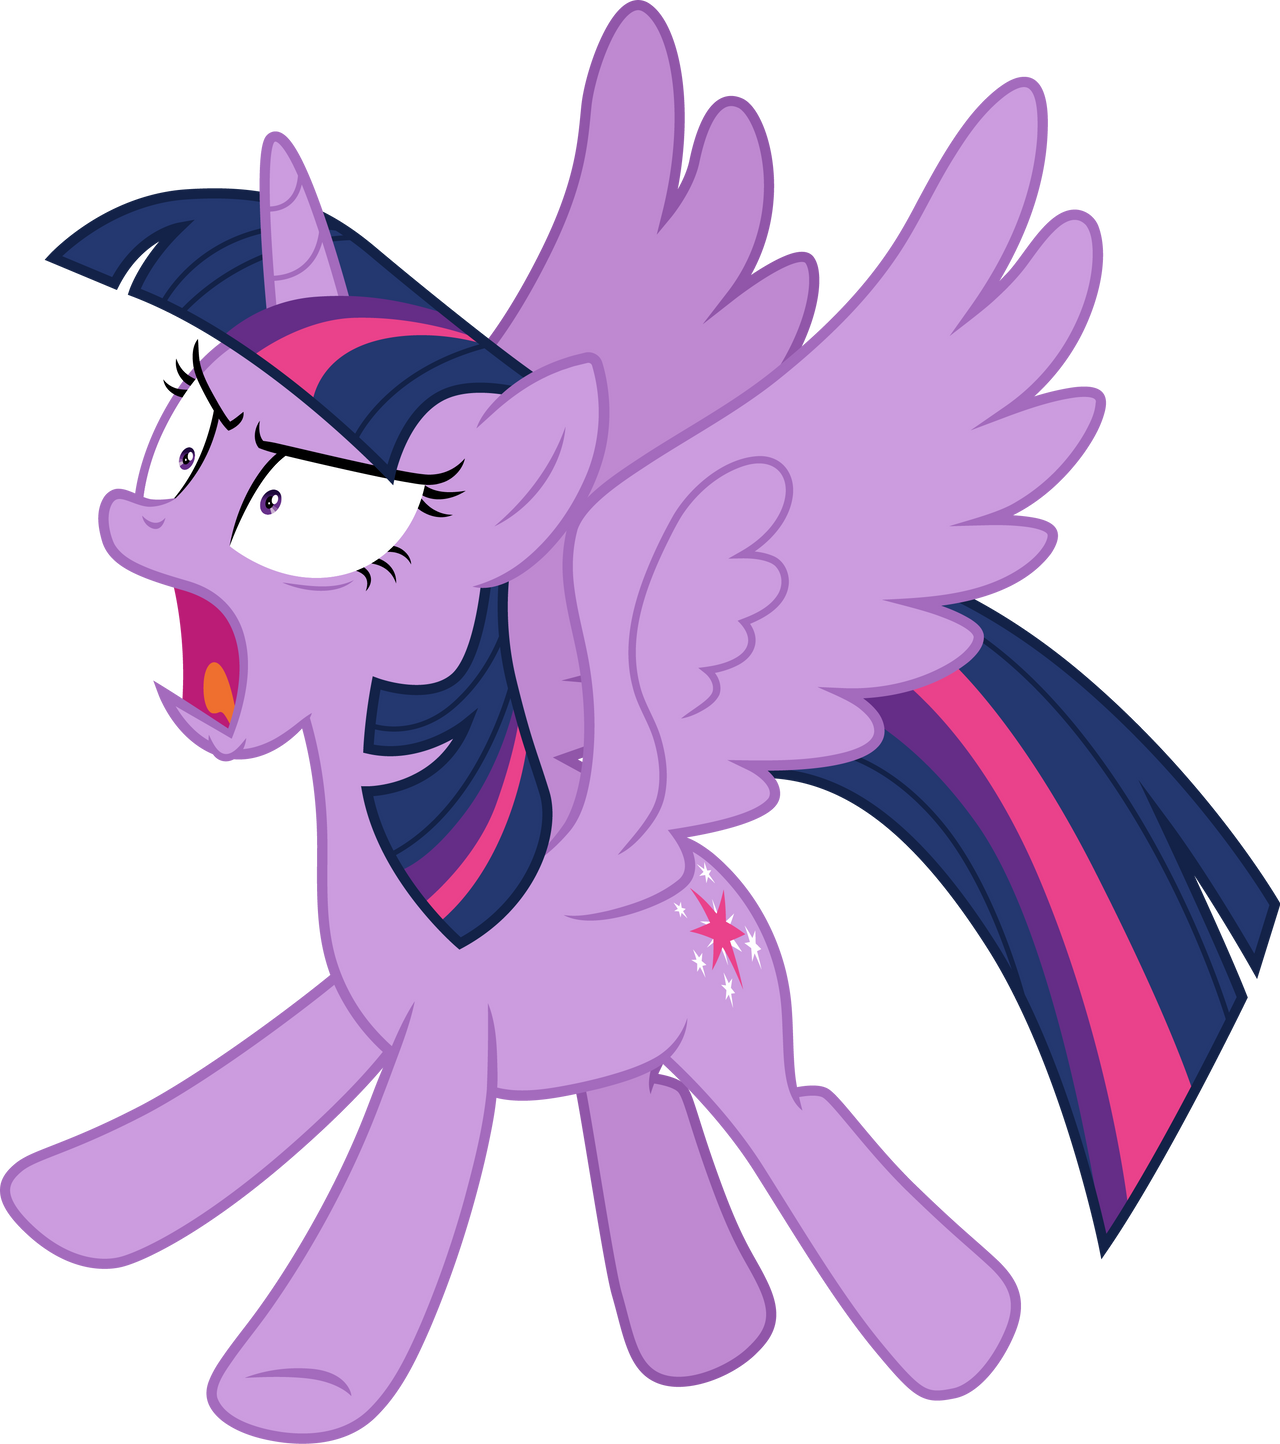 Angry Twilight Sparkle 1 by CloudyGlow on DeviantArt